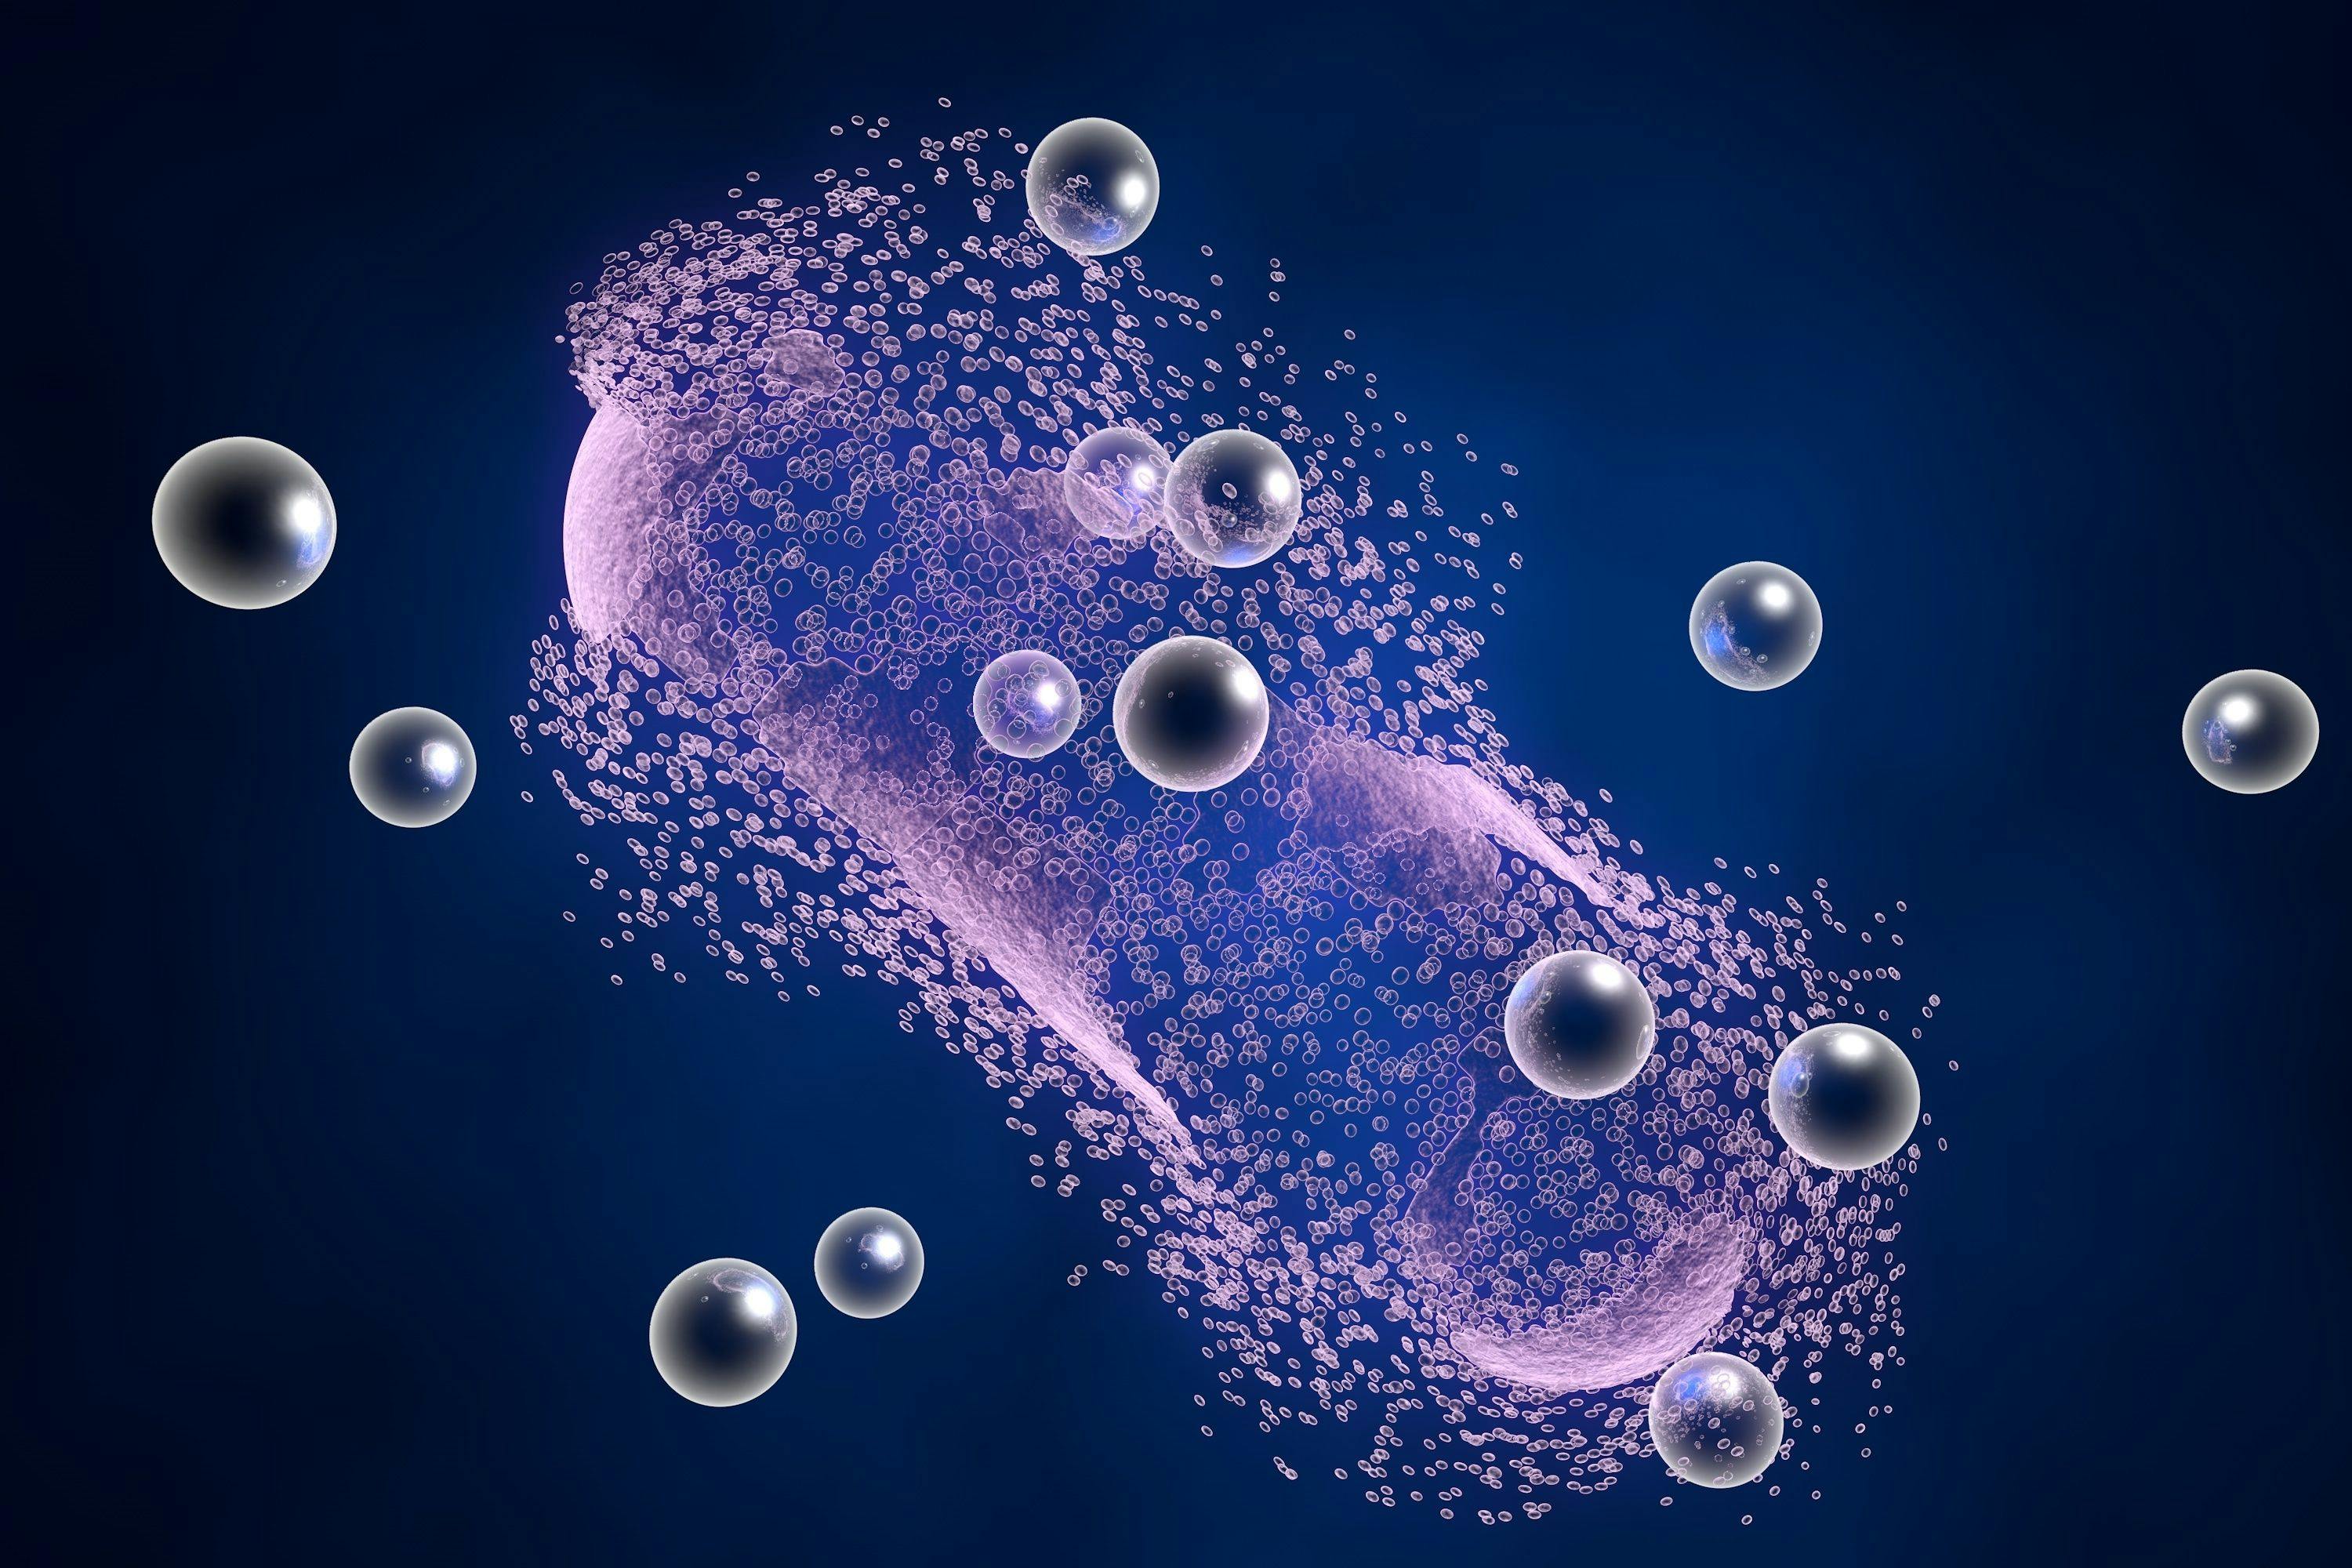 Destruction of a bacterium by silver nanoparticles. An illustration can be also used to demonstrate action of any antibiotic substance or drug | Image Credit: © Dr_Microbe - stock.adobe.com